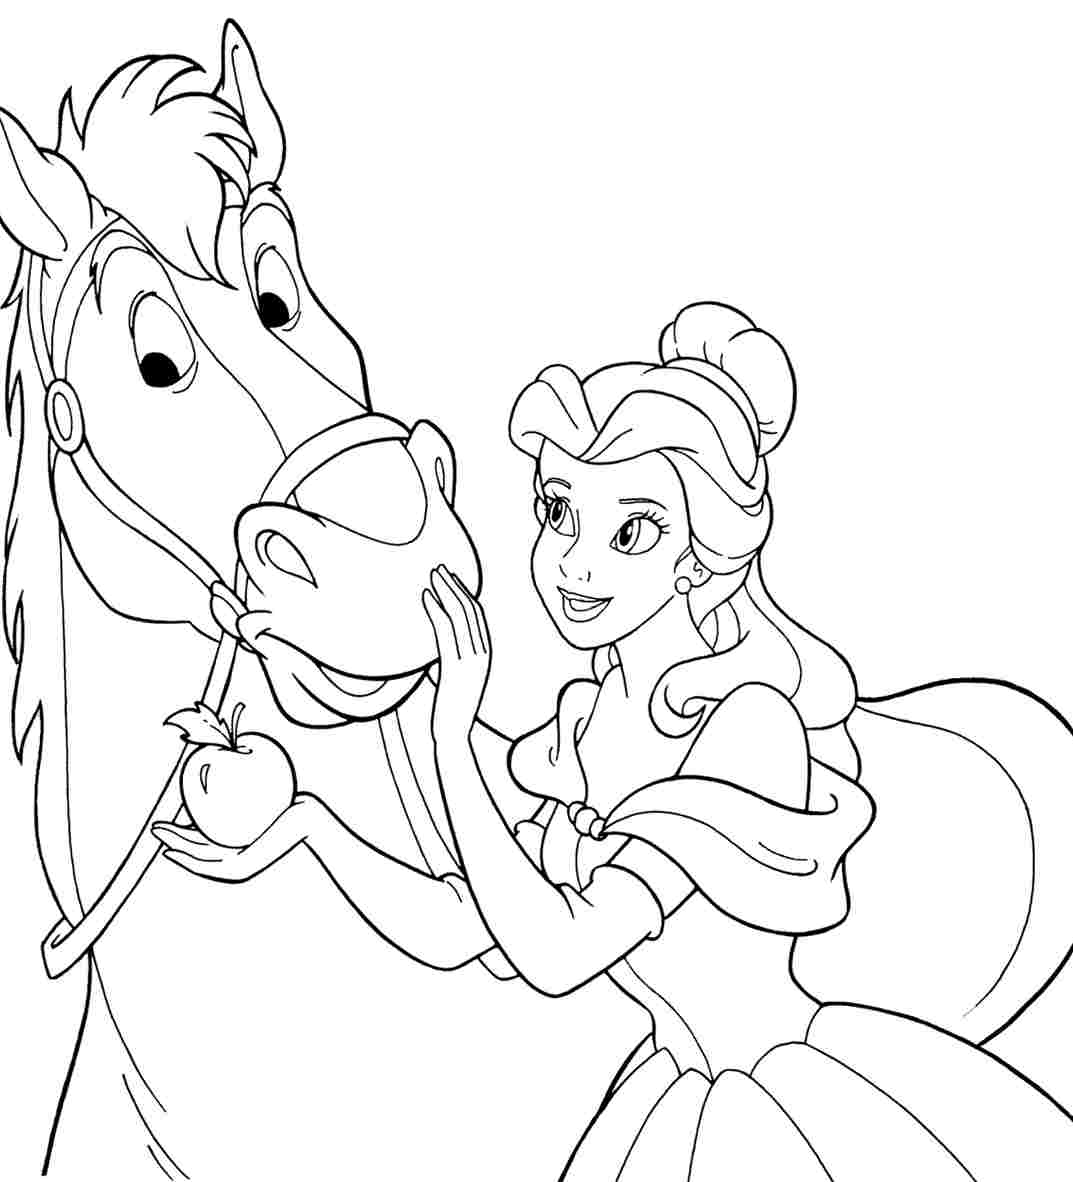 Beast Coloring Pages Realistic - Coloring Pages For All Ages